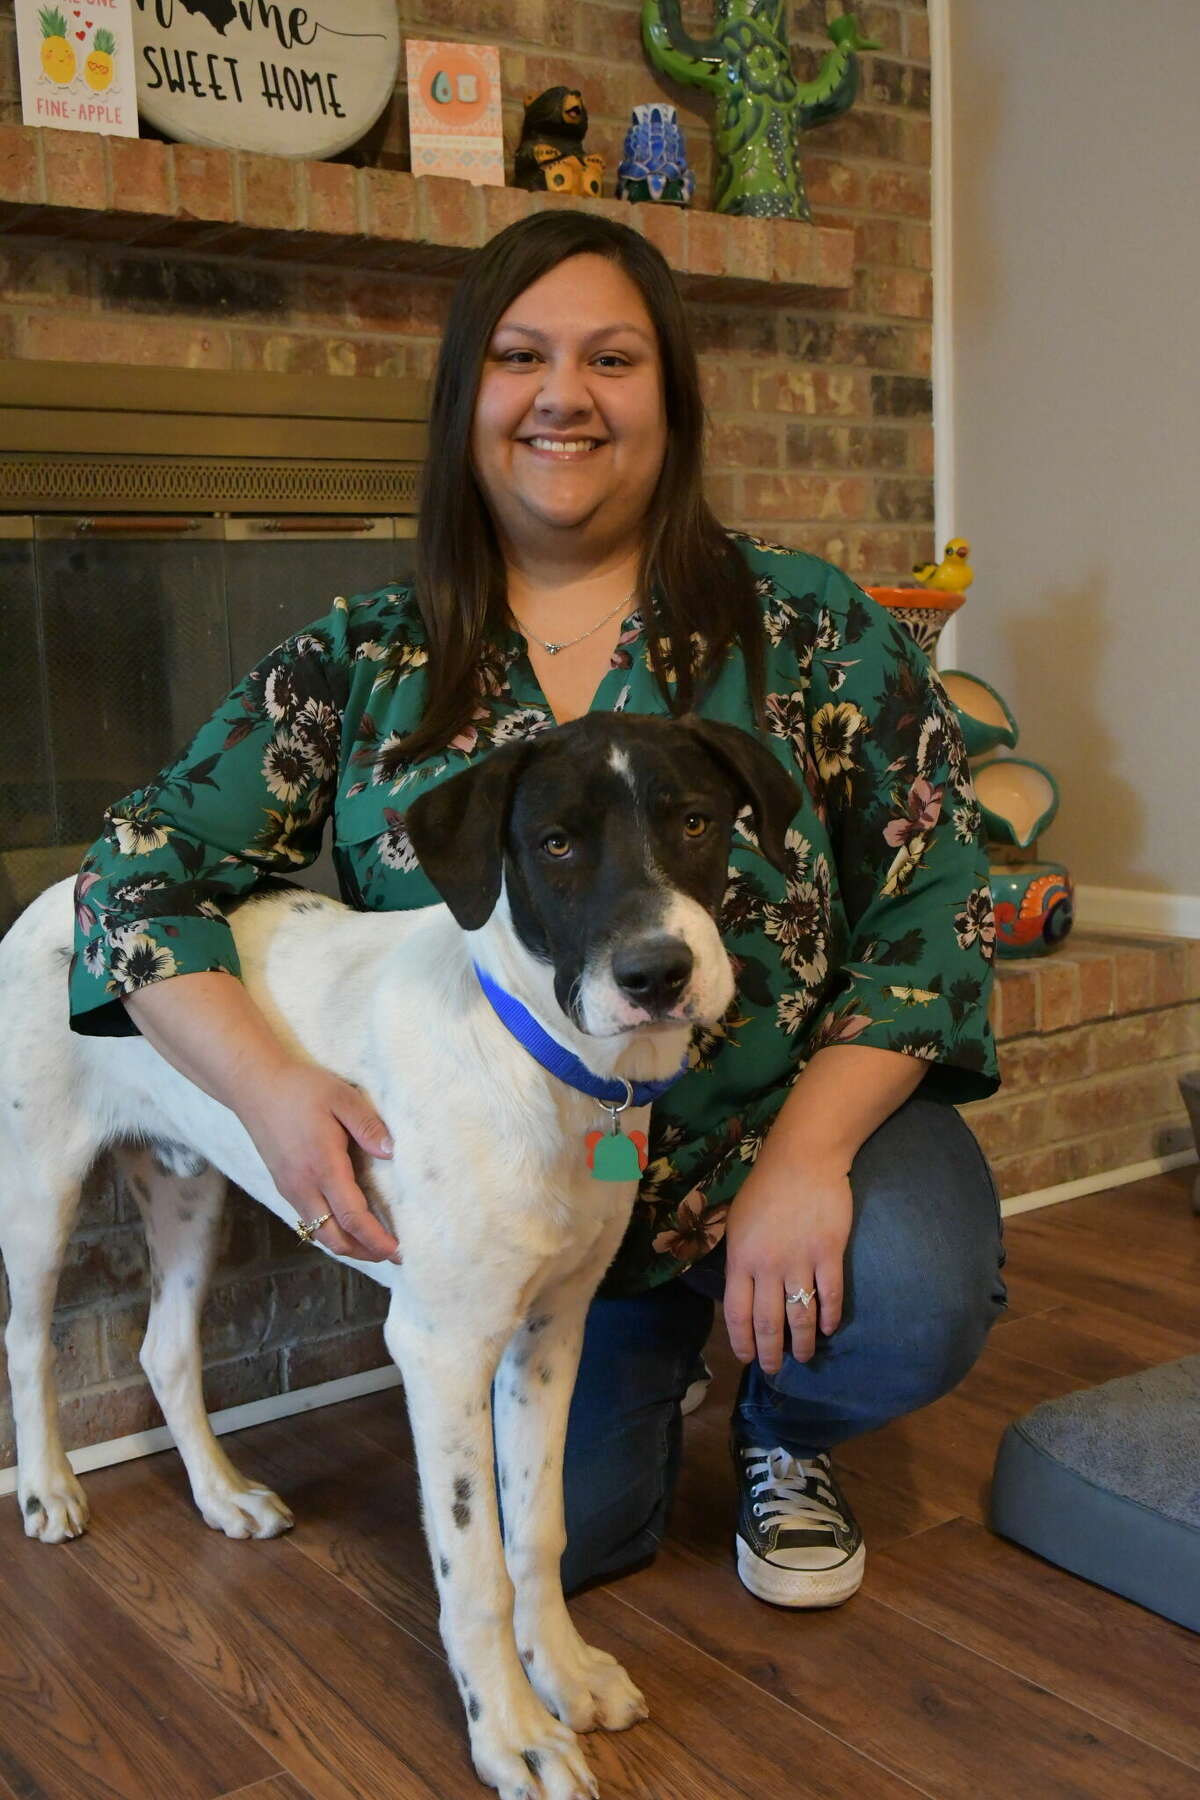 Desirae Ryon and her wife are fostering "Gunther" after he was found in a field south of Interstate 20 on Wednesday with his mouth taped shut and his legs taped together "